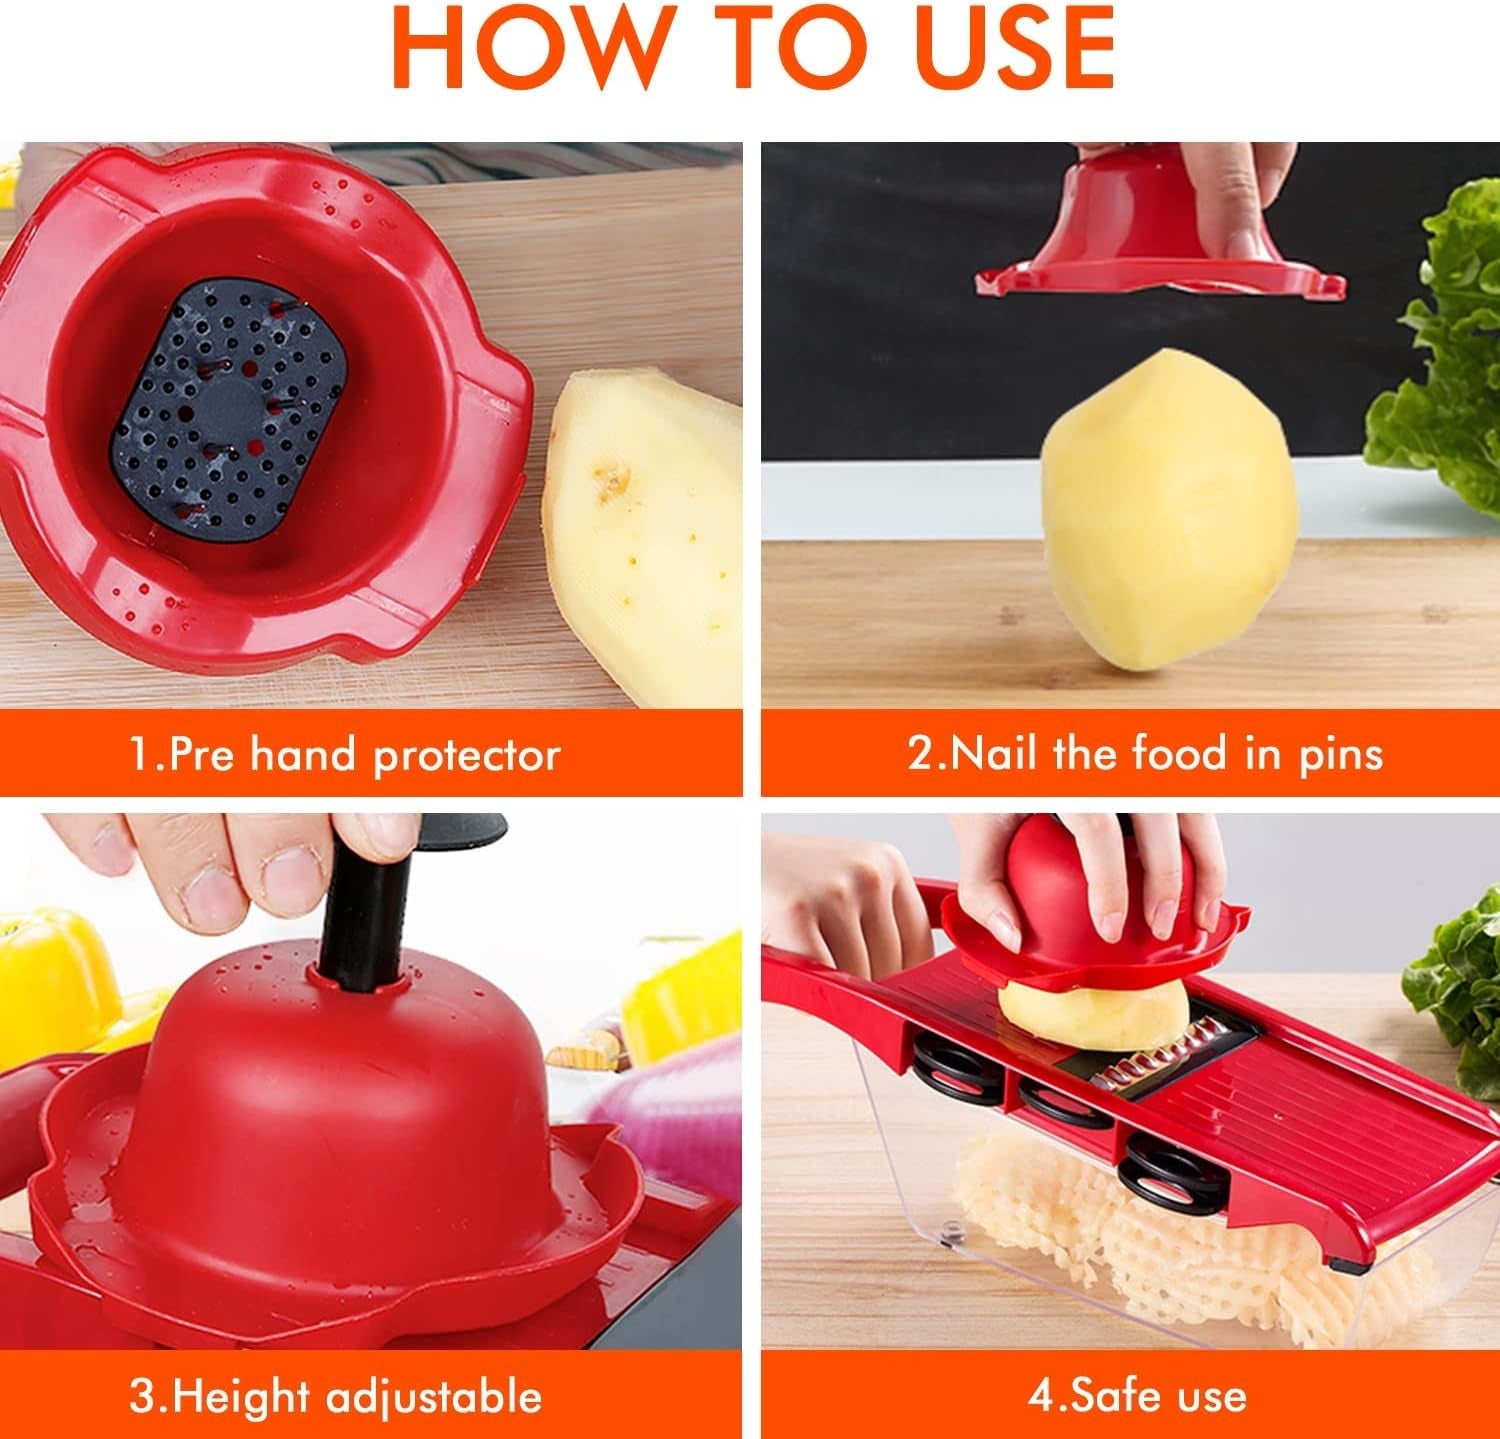 10 in 1 Multi-Function Vegetable and Fruit Chopper, Mandoline Slicer, Onion Potato Cheese Shredder, Salad Spiralizer Cutter, Veggie Grater Dicer Artifact with Vegetable Peeler,Hand Guard and Container  xinmu   